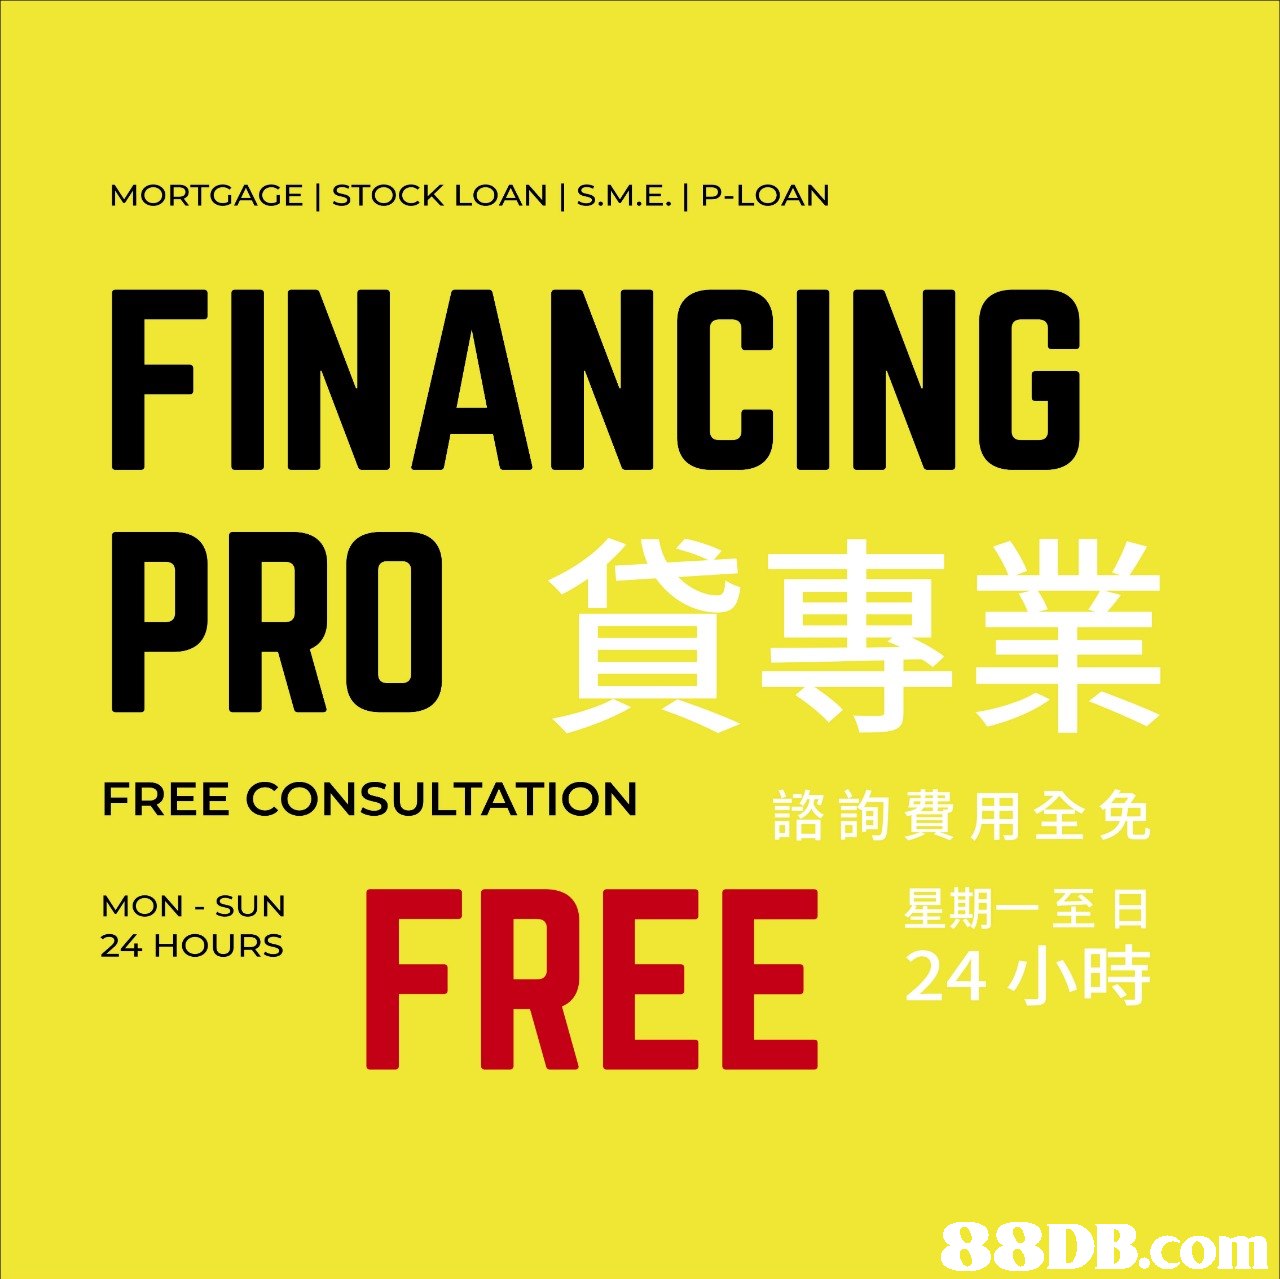 MORTGAGE | STOCK LOAN | S.M.E. | P-LOAN FINANCING PRO貨專業 FREE 代 FREE CONSULTATION 諮詢費用全免 星期一至日 24小時 MON SUN 24 HOURS   Text,Font,Yellow